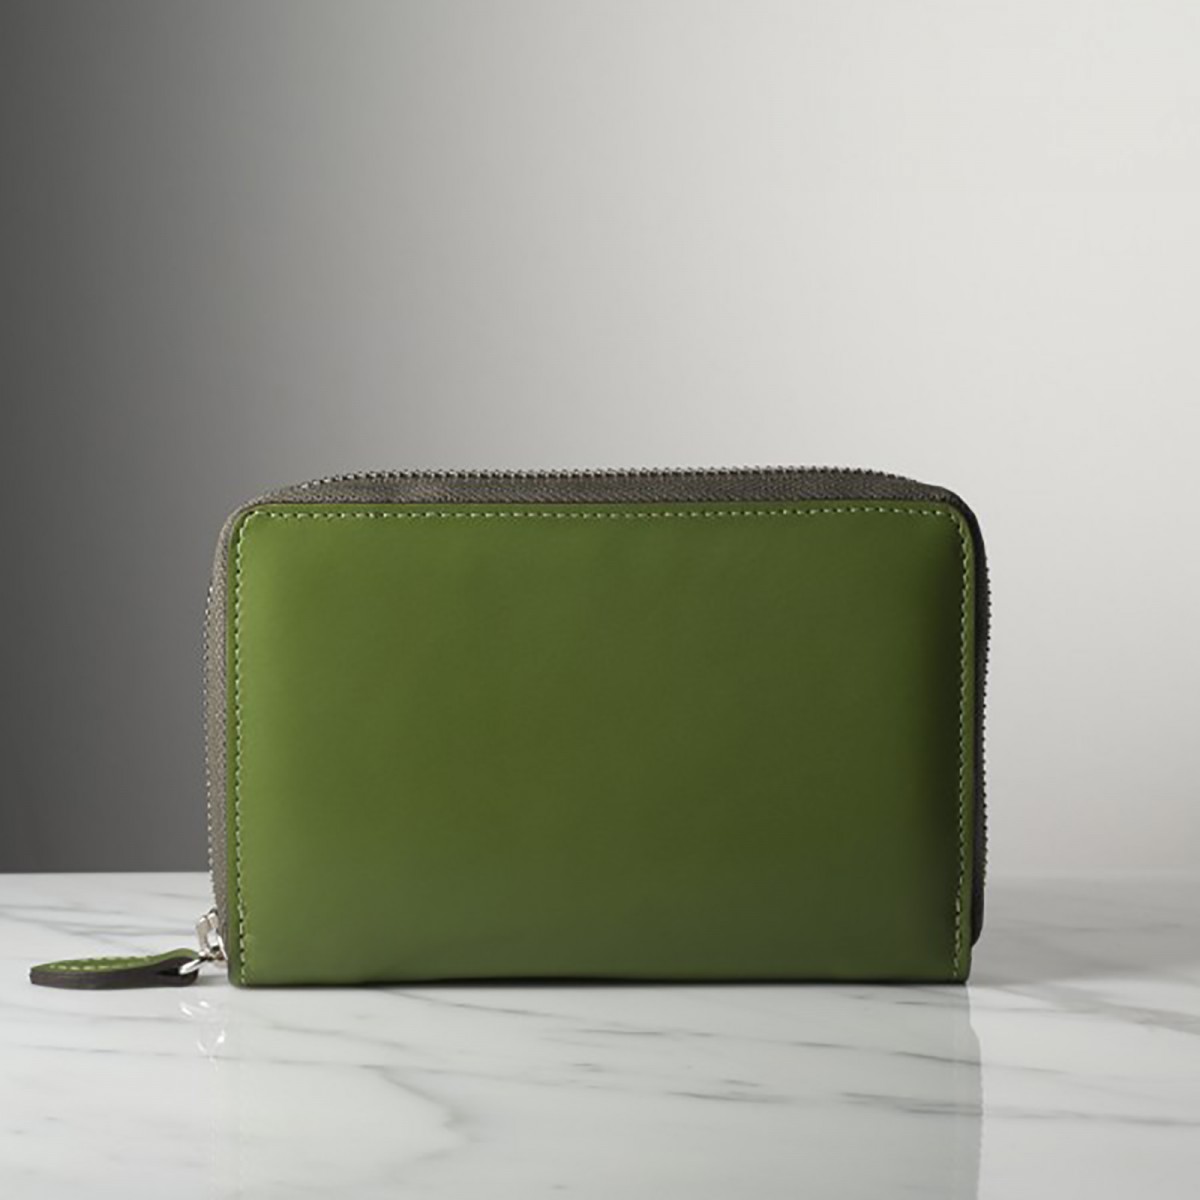 GINETTE - Calfskin leather wallet, handmade in Italy